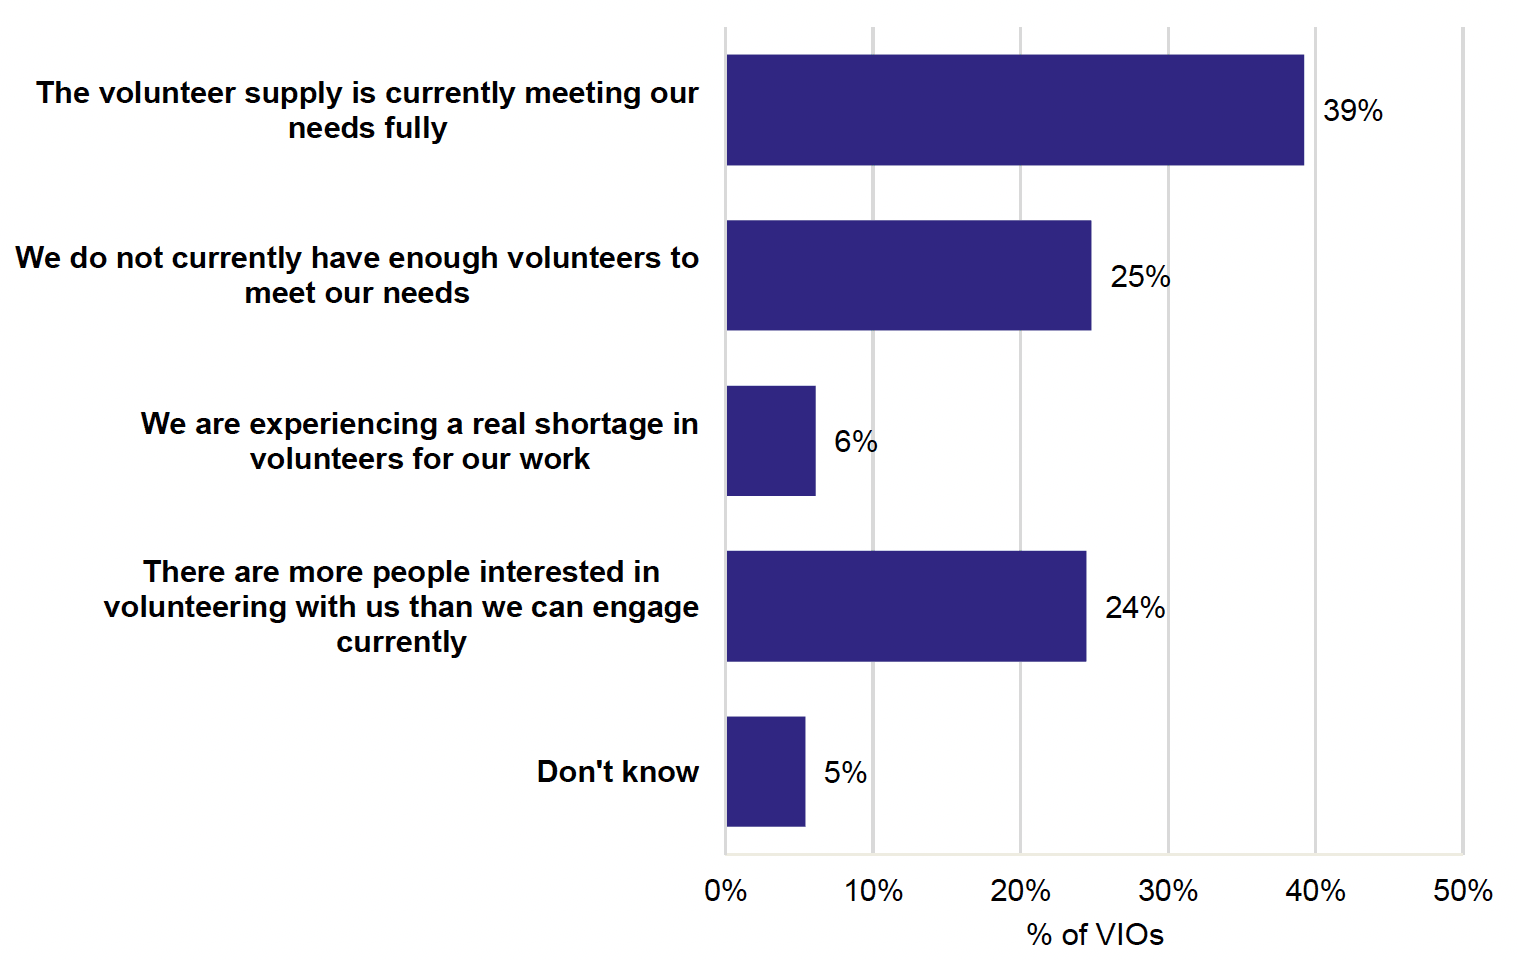 Chart showing volunteer-involving organisation views on the extent to which the current supply of volunteers is meeting organisational needs